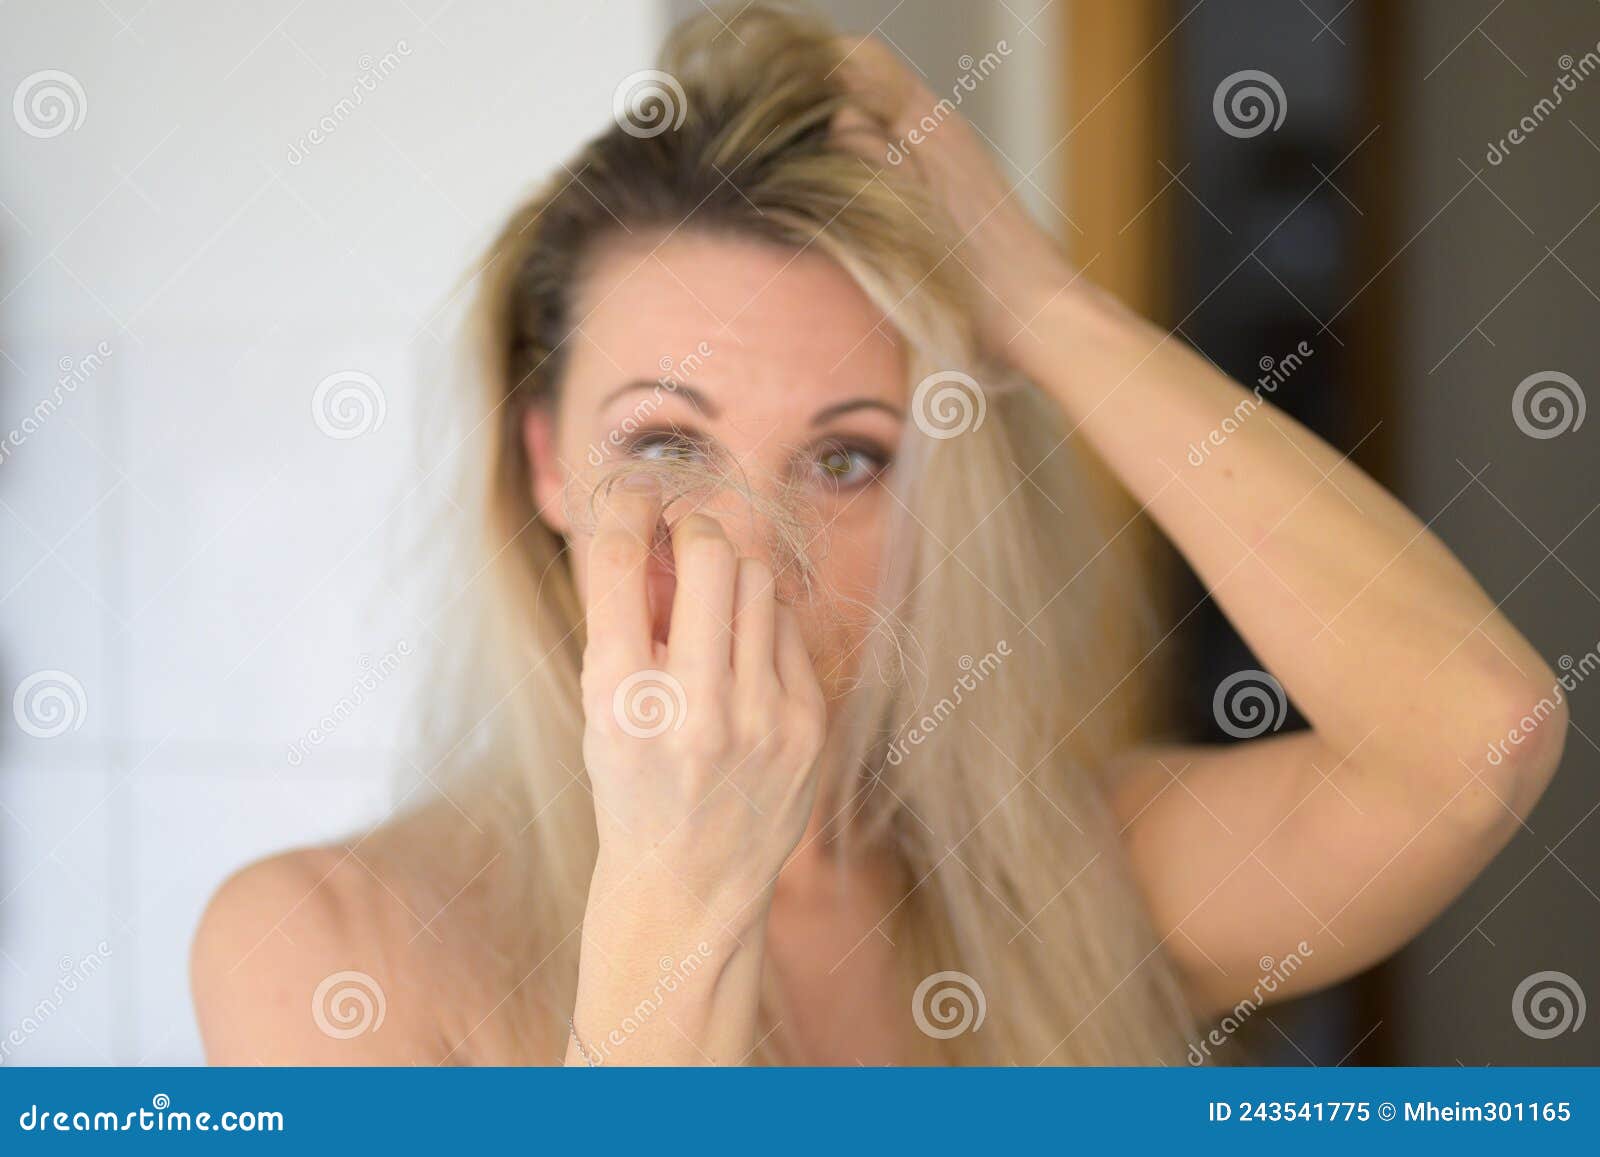 woman staring in dismay at tufts of loose hair